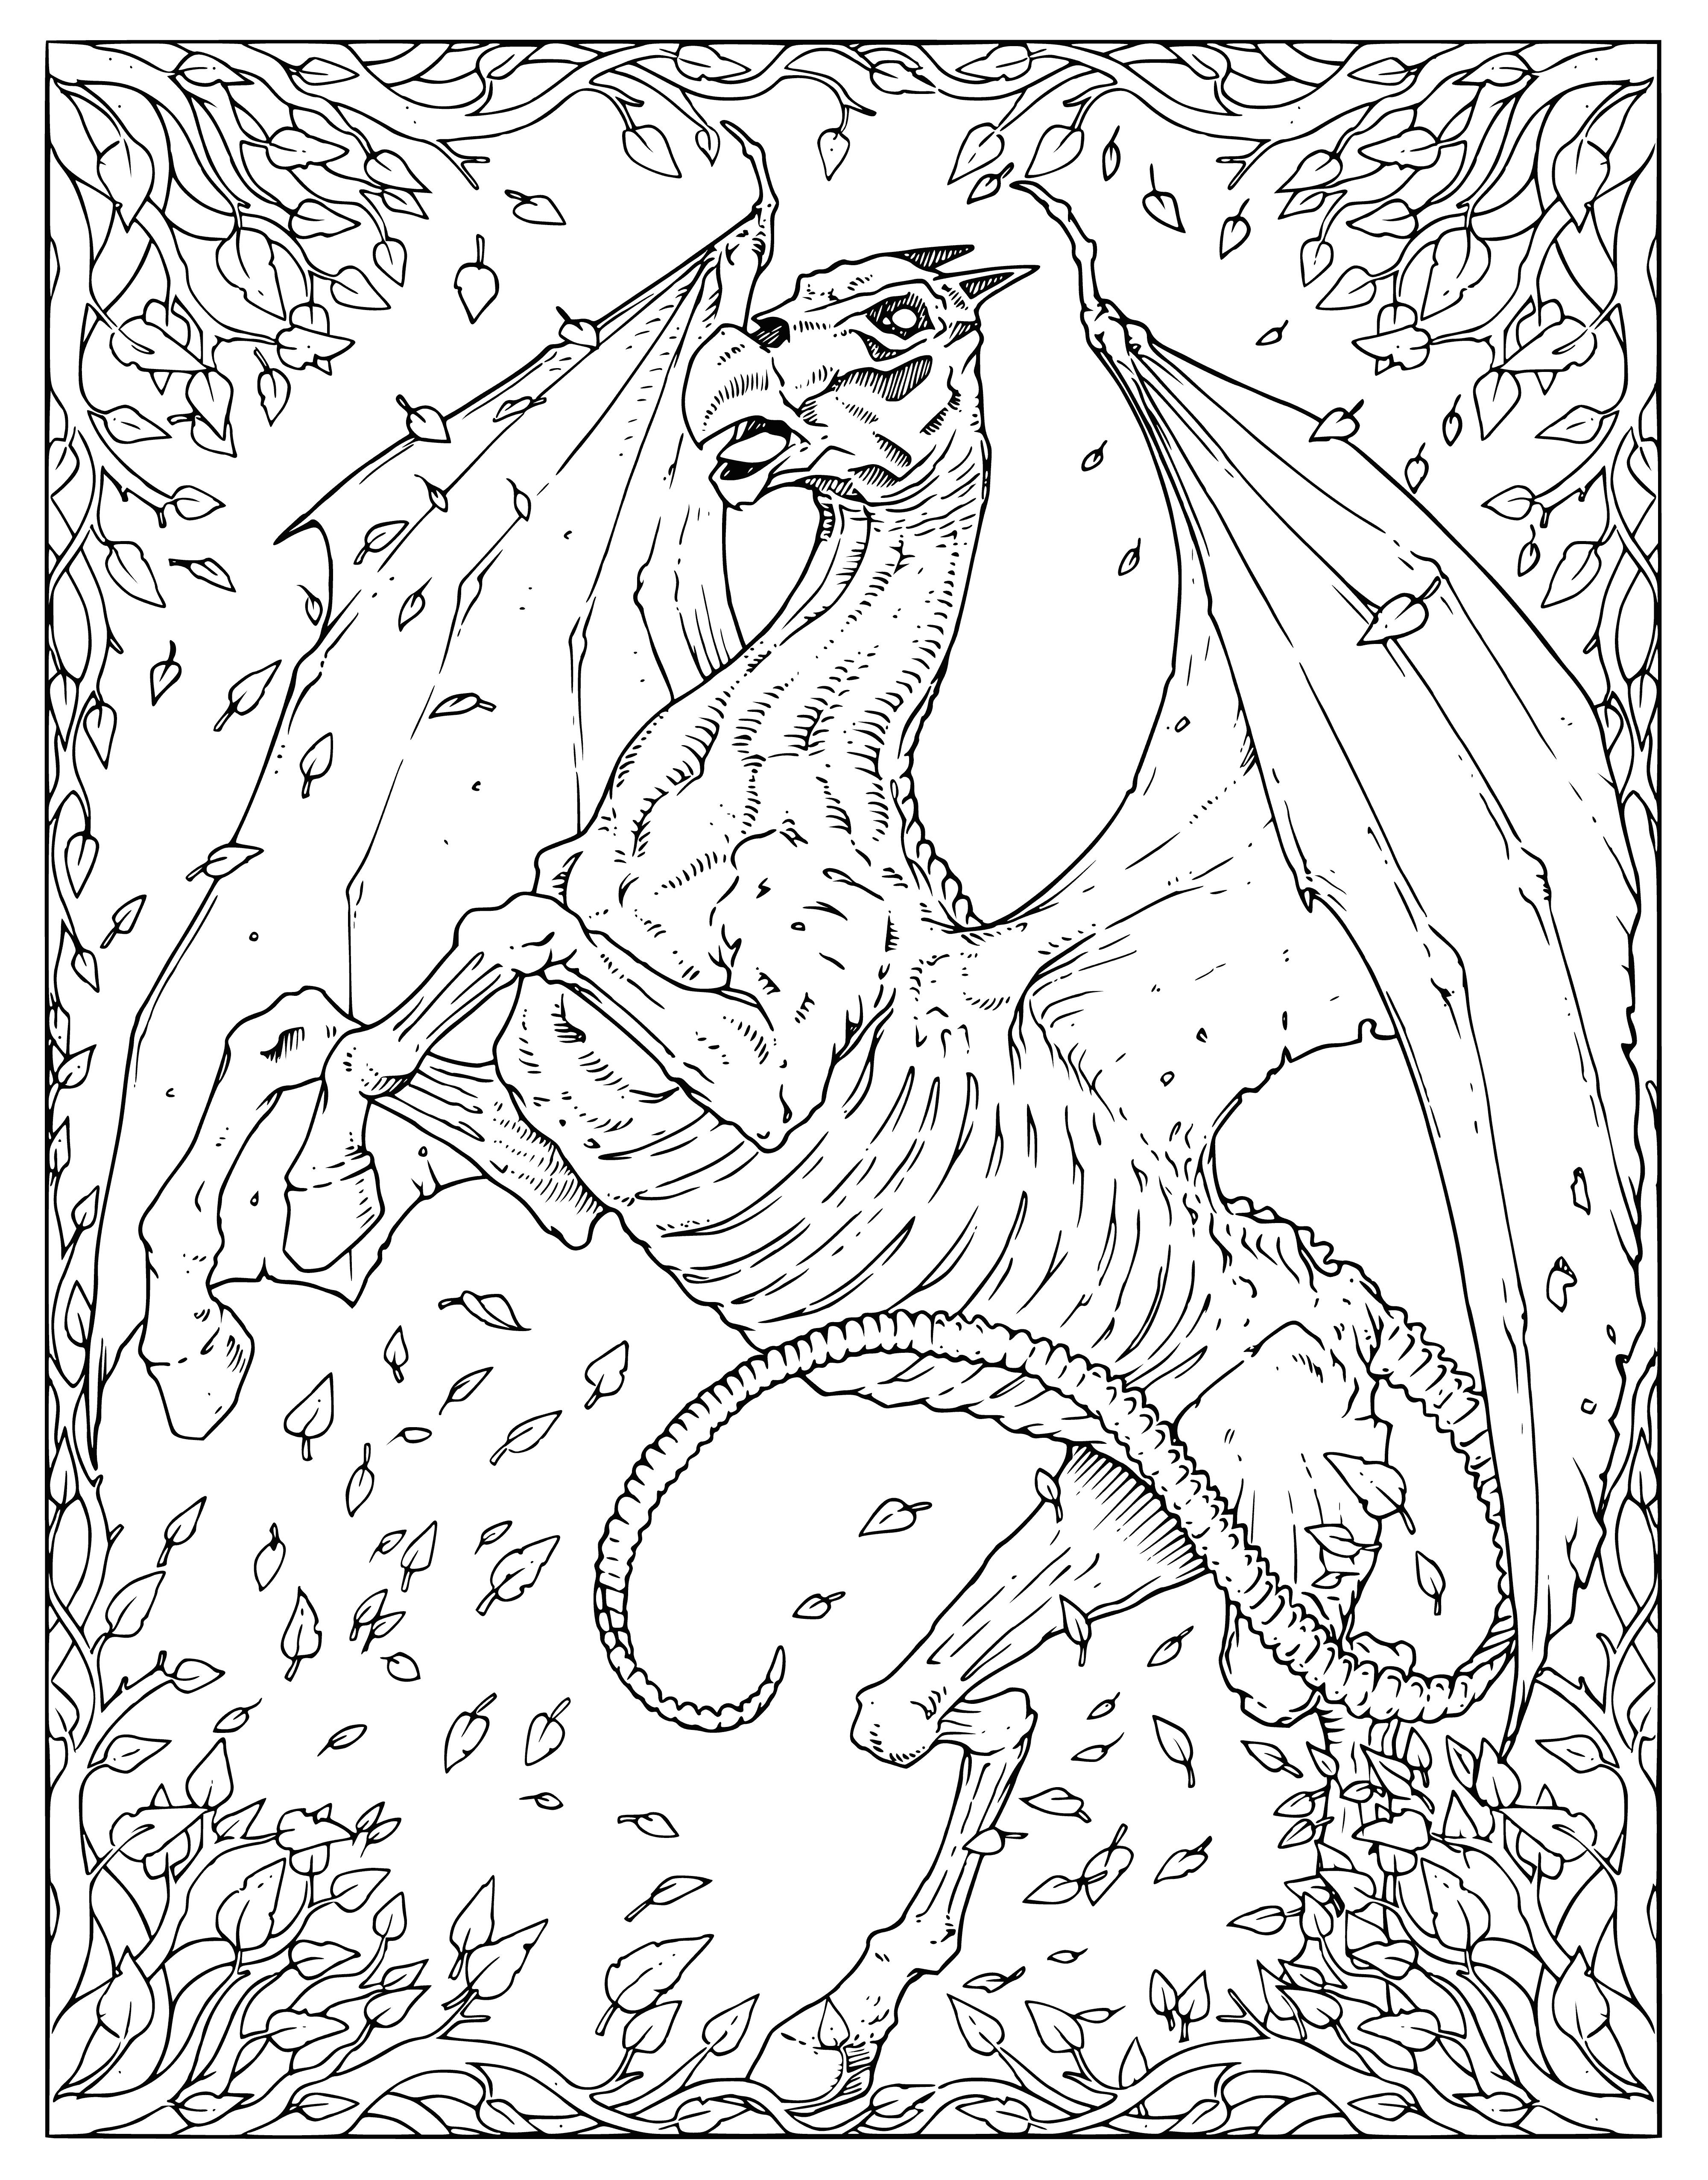 Festral coloring page